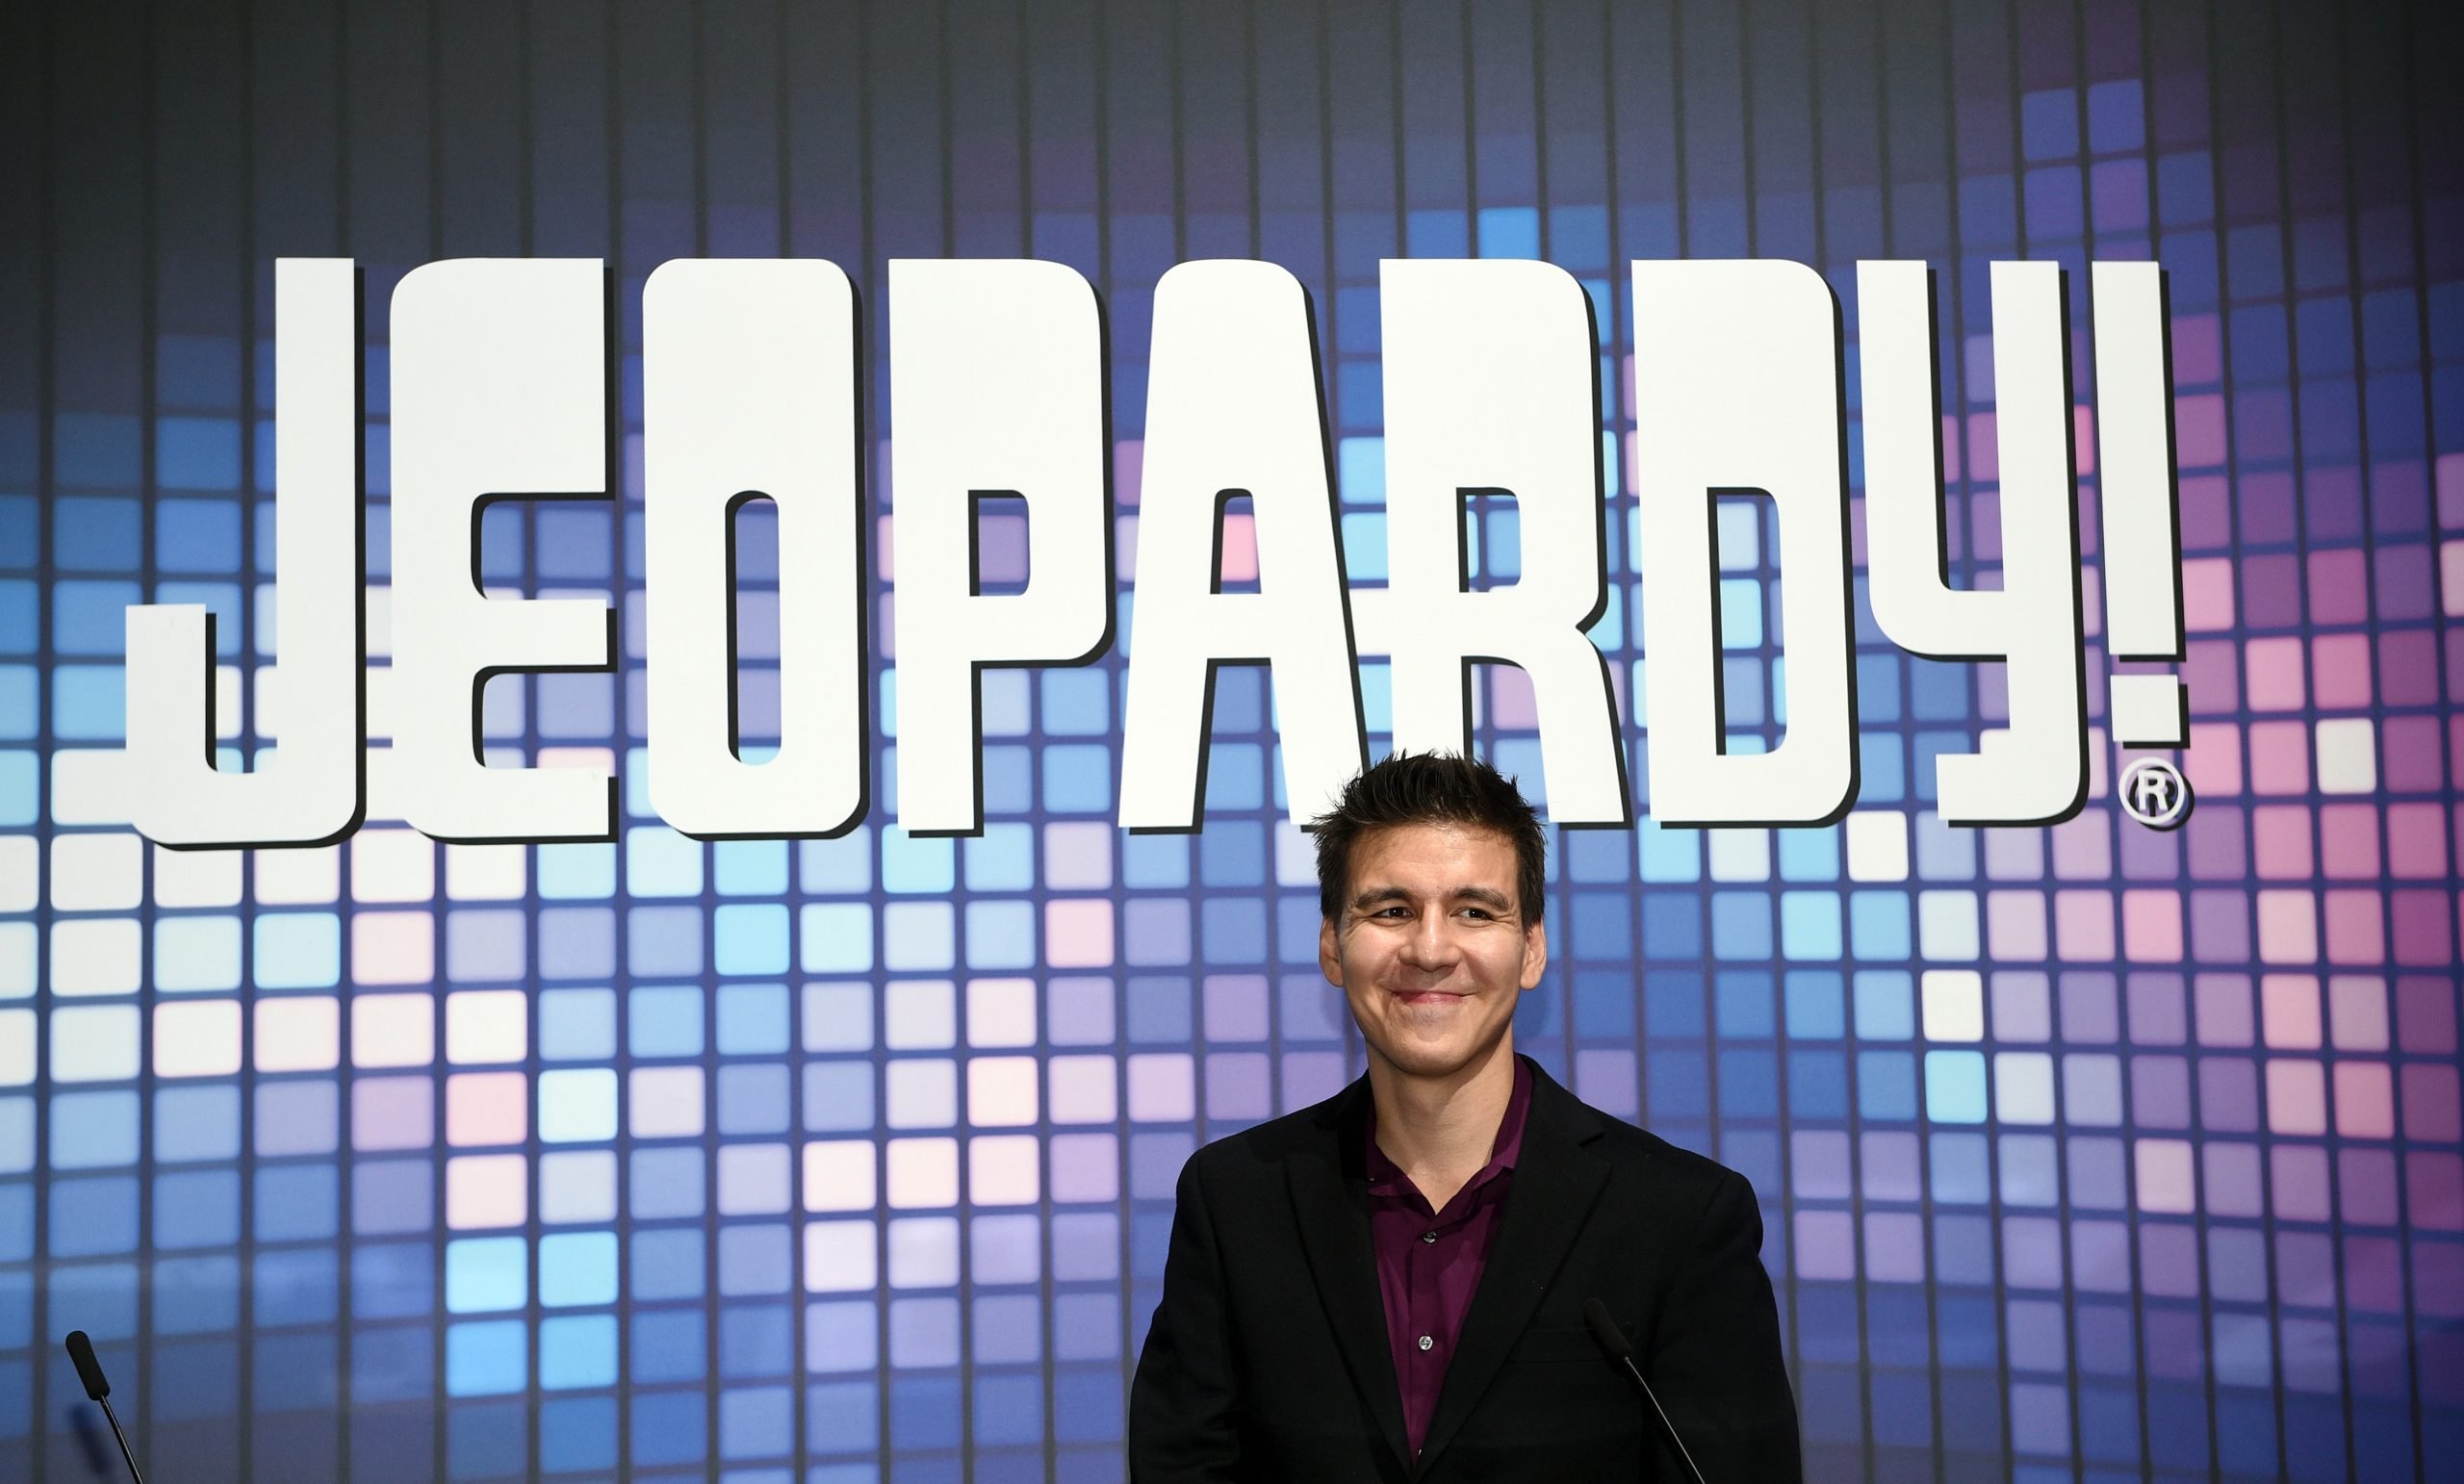 'Jeopardy!'s James Holzhauer has something to say about the quiz show's search for a new host.